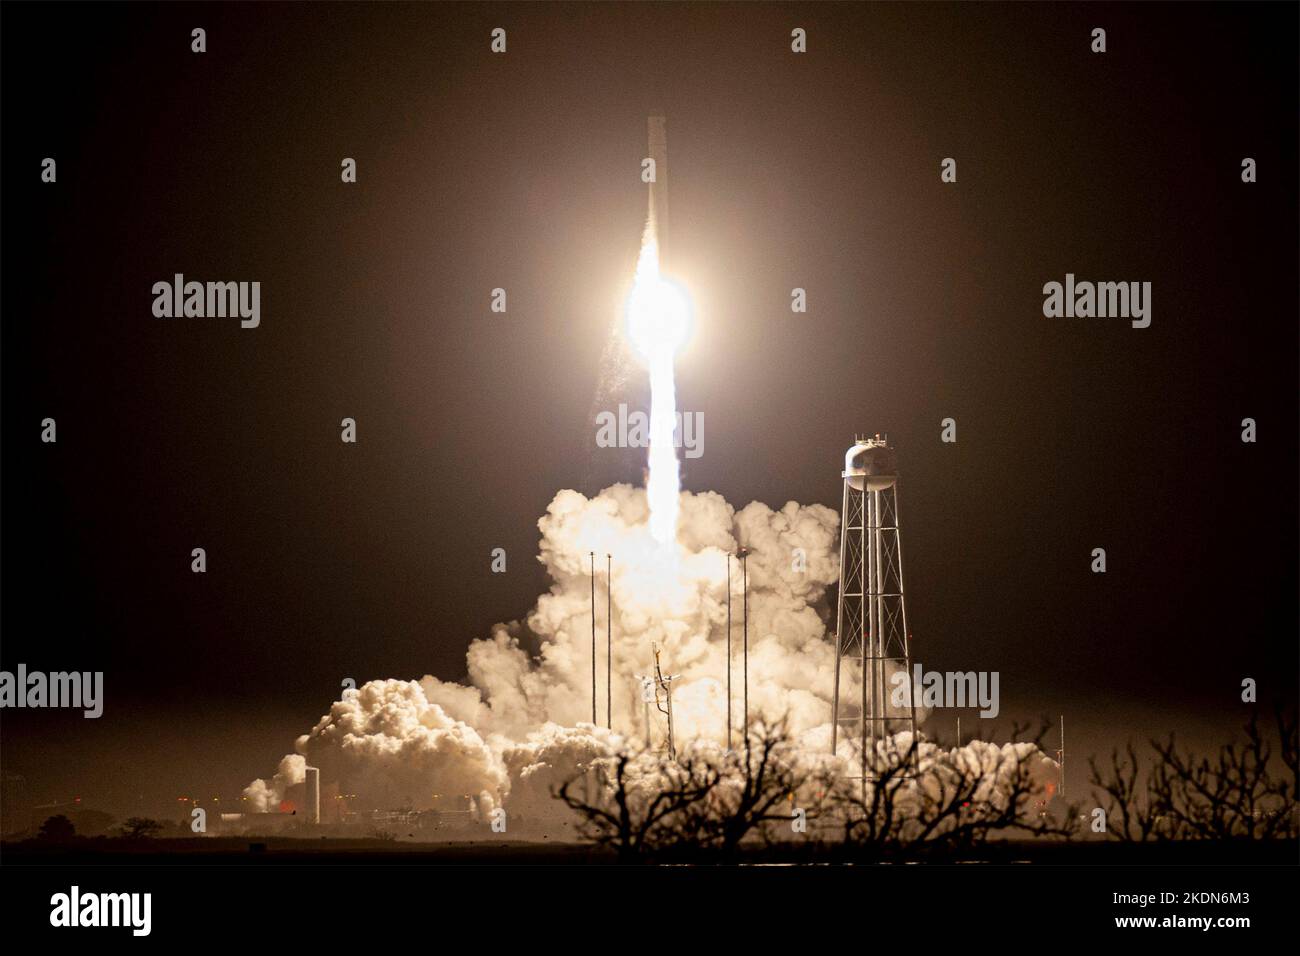 Wallops Island, United States of America. 07 November, 2022. The Northrop Grumman Antares rocket carrying the unmanned Cygnus spacecraft blasts off in a predawn launch from the Mid-Atlantic Regional Spaceport Pad-0A at the NASA Wallops Flight Facility, November 7, 2022 in Wallops Island, Virginia, USA. The launch is the 18th unmanned cargo resupply mission by Northrop Grumman to the International Space Station. Credit: Terry Zaperach/NASA/Alamy Live News Stock Photo